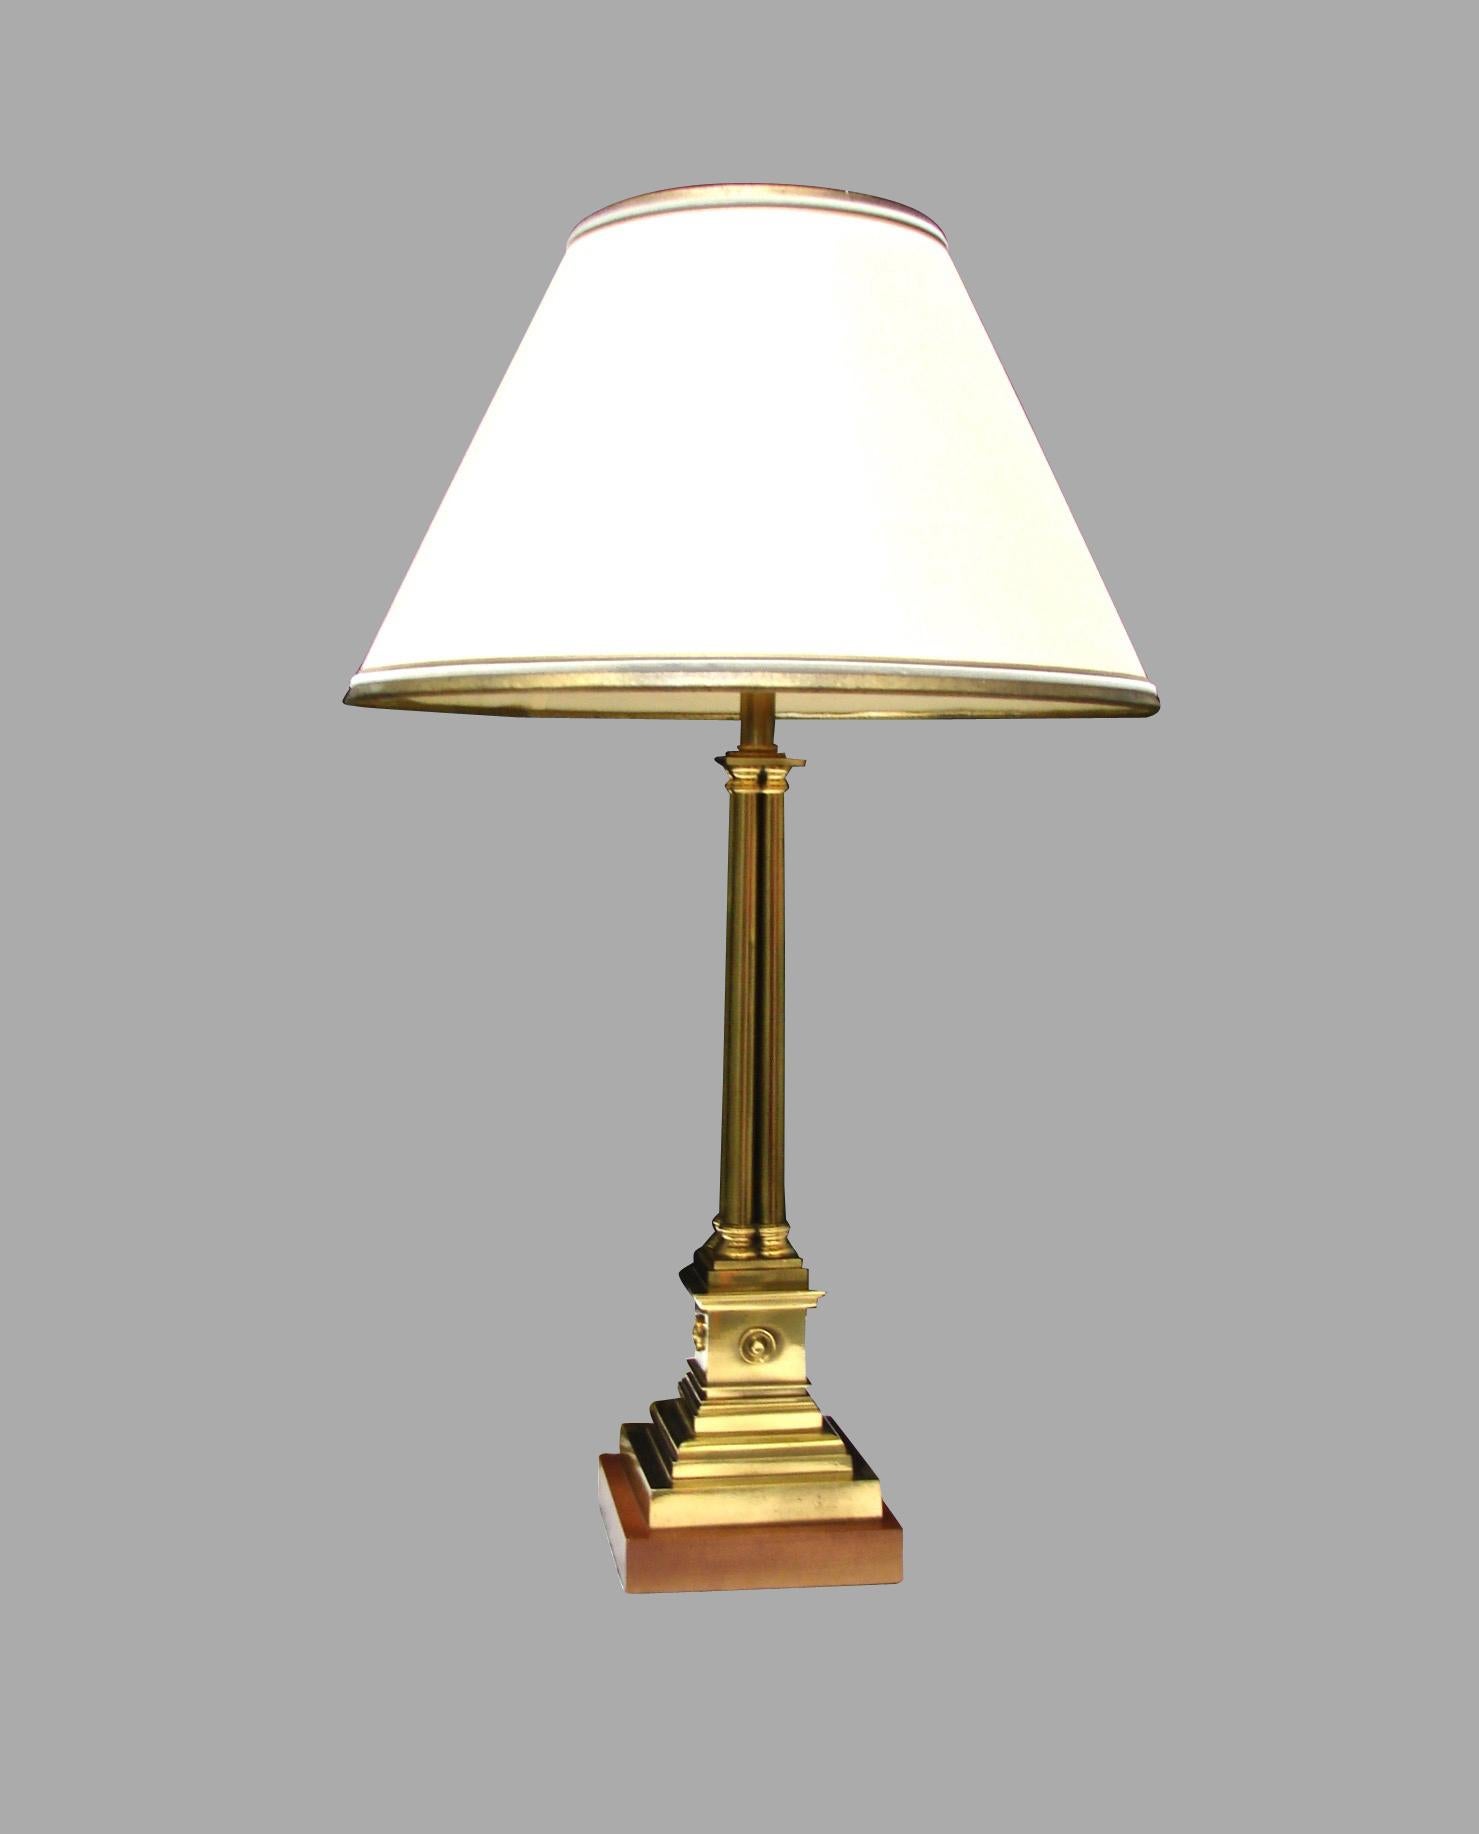 A good quality brass table lamp consisting of 4 individual close columns mounted on multiple brass tiers on a square walnut base. Custom silk shade with colored trim. Twentieth century.